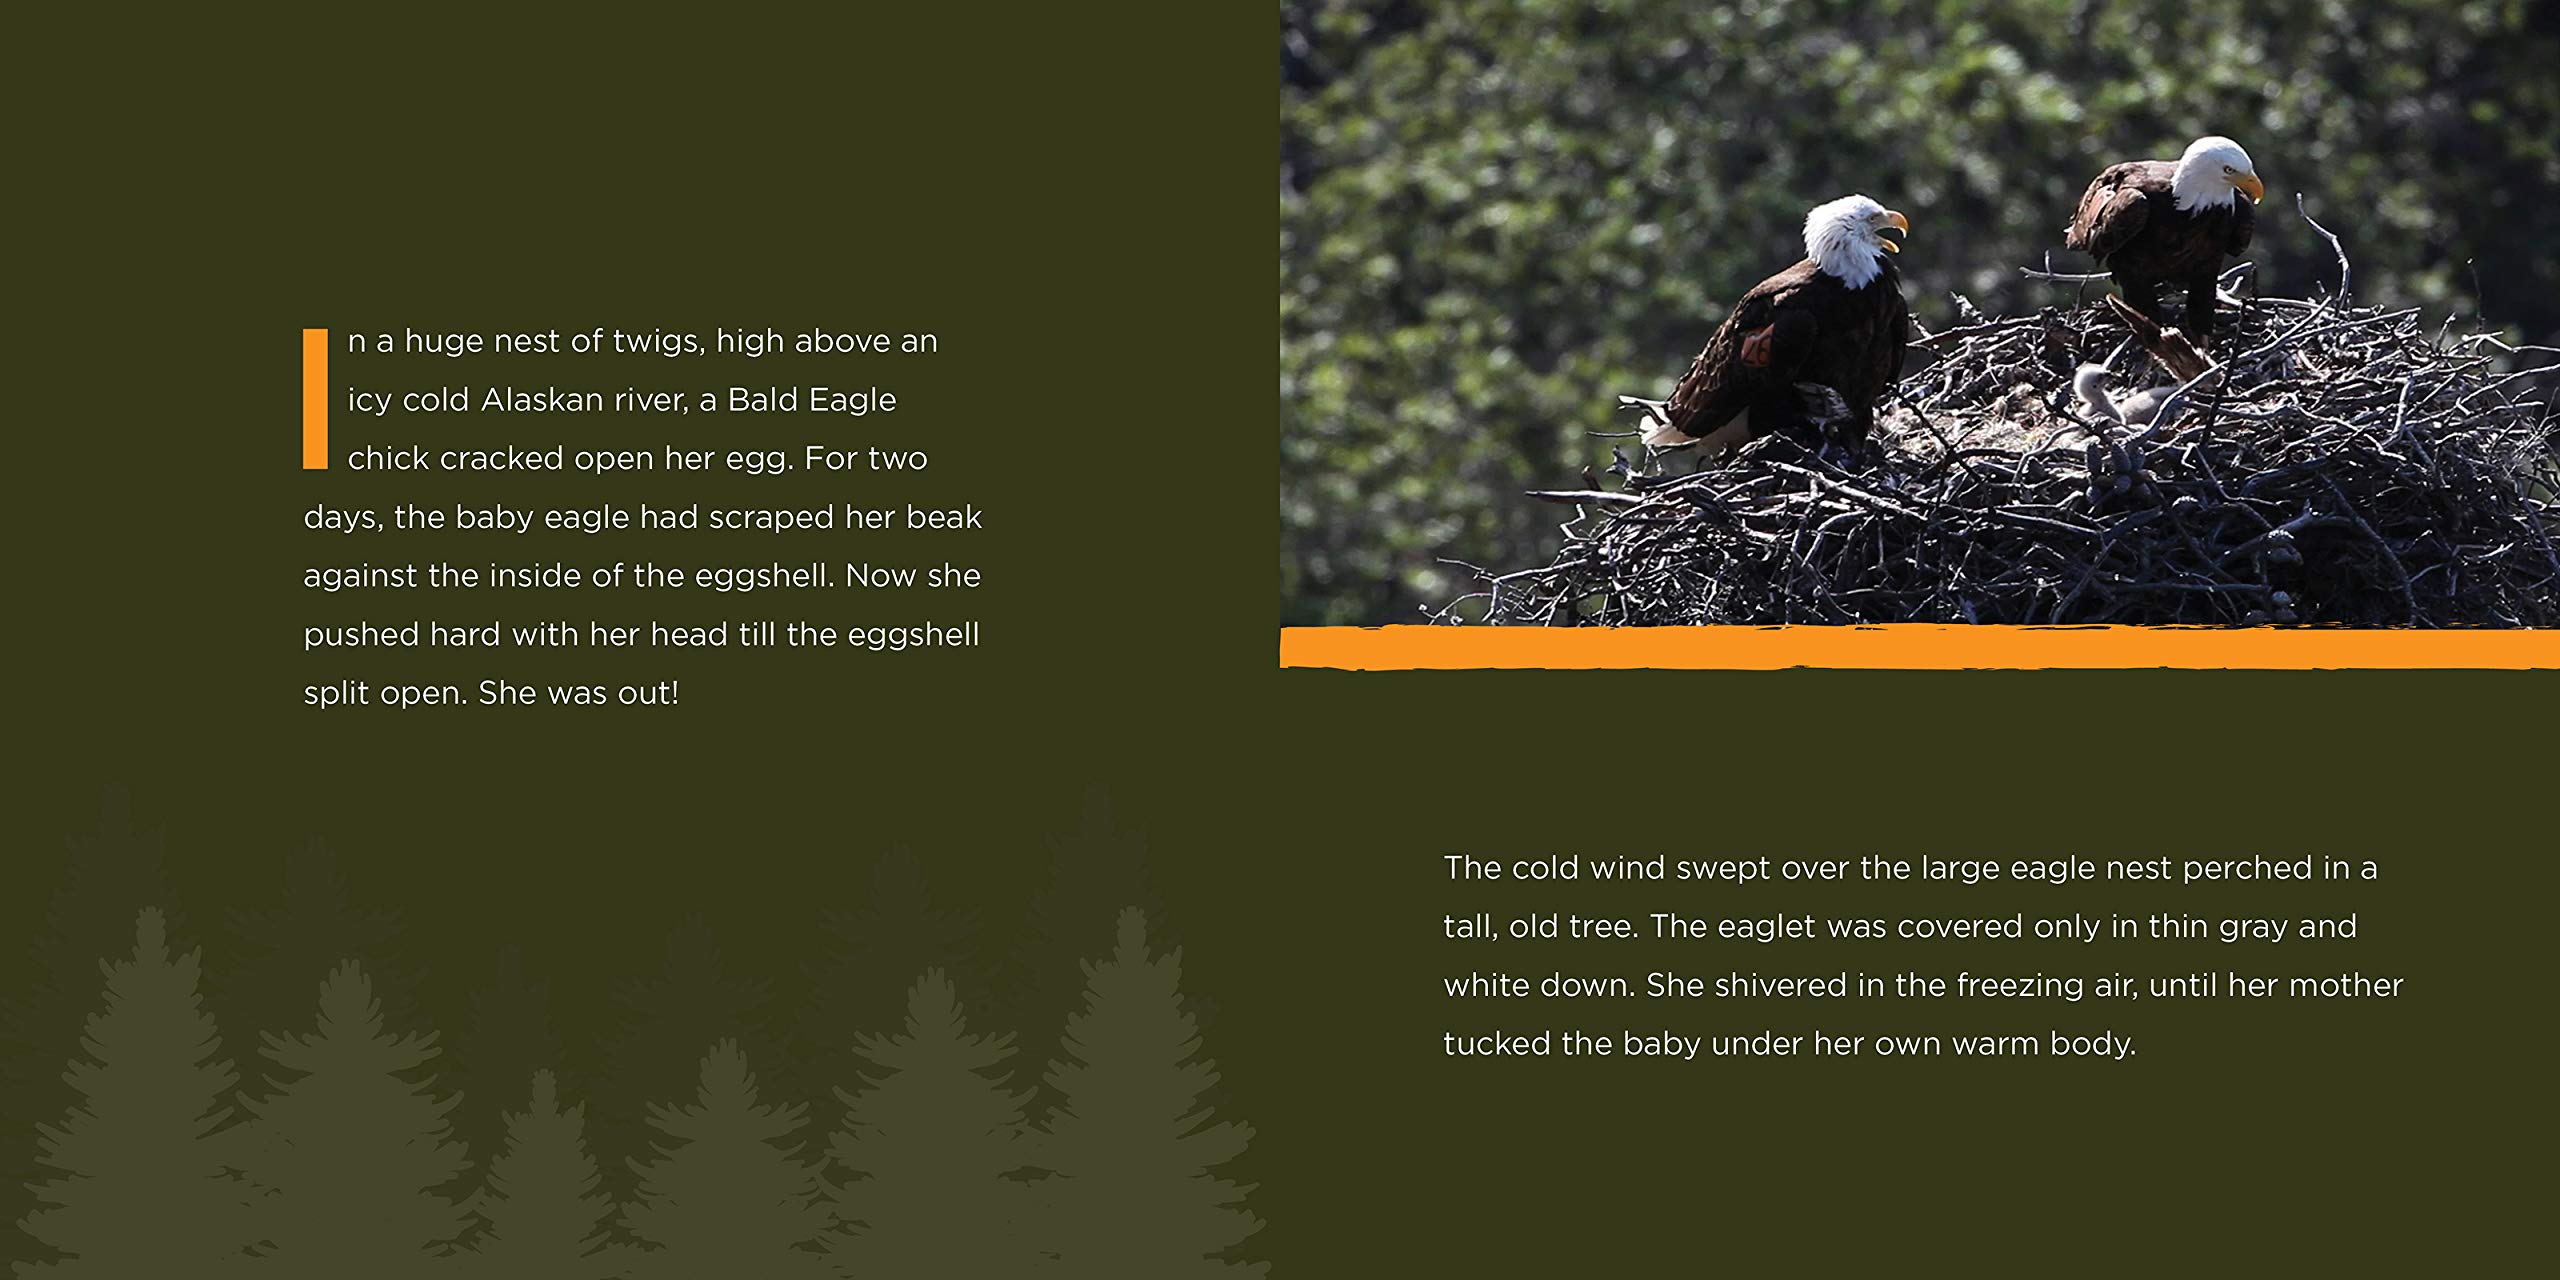 Beauty and the Beak: How Science, Technology, and a 3D-Printed Beak Rescued a Bald Eagle